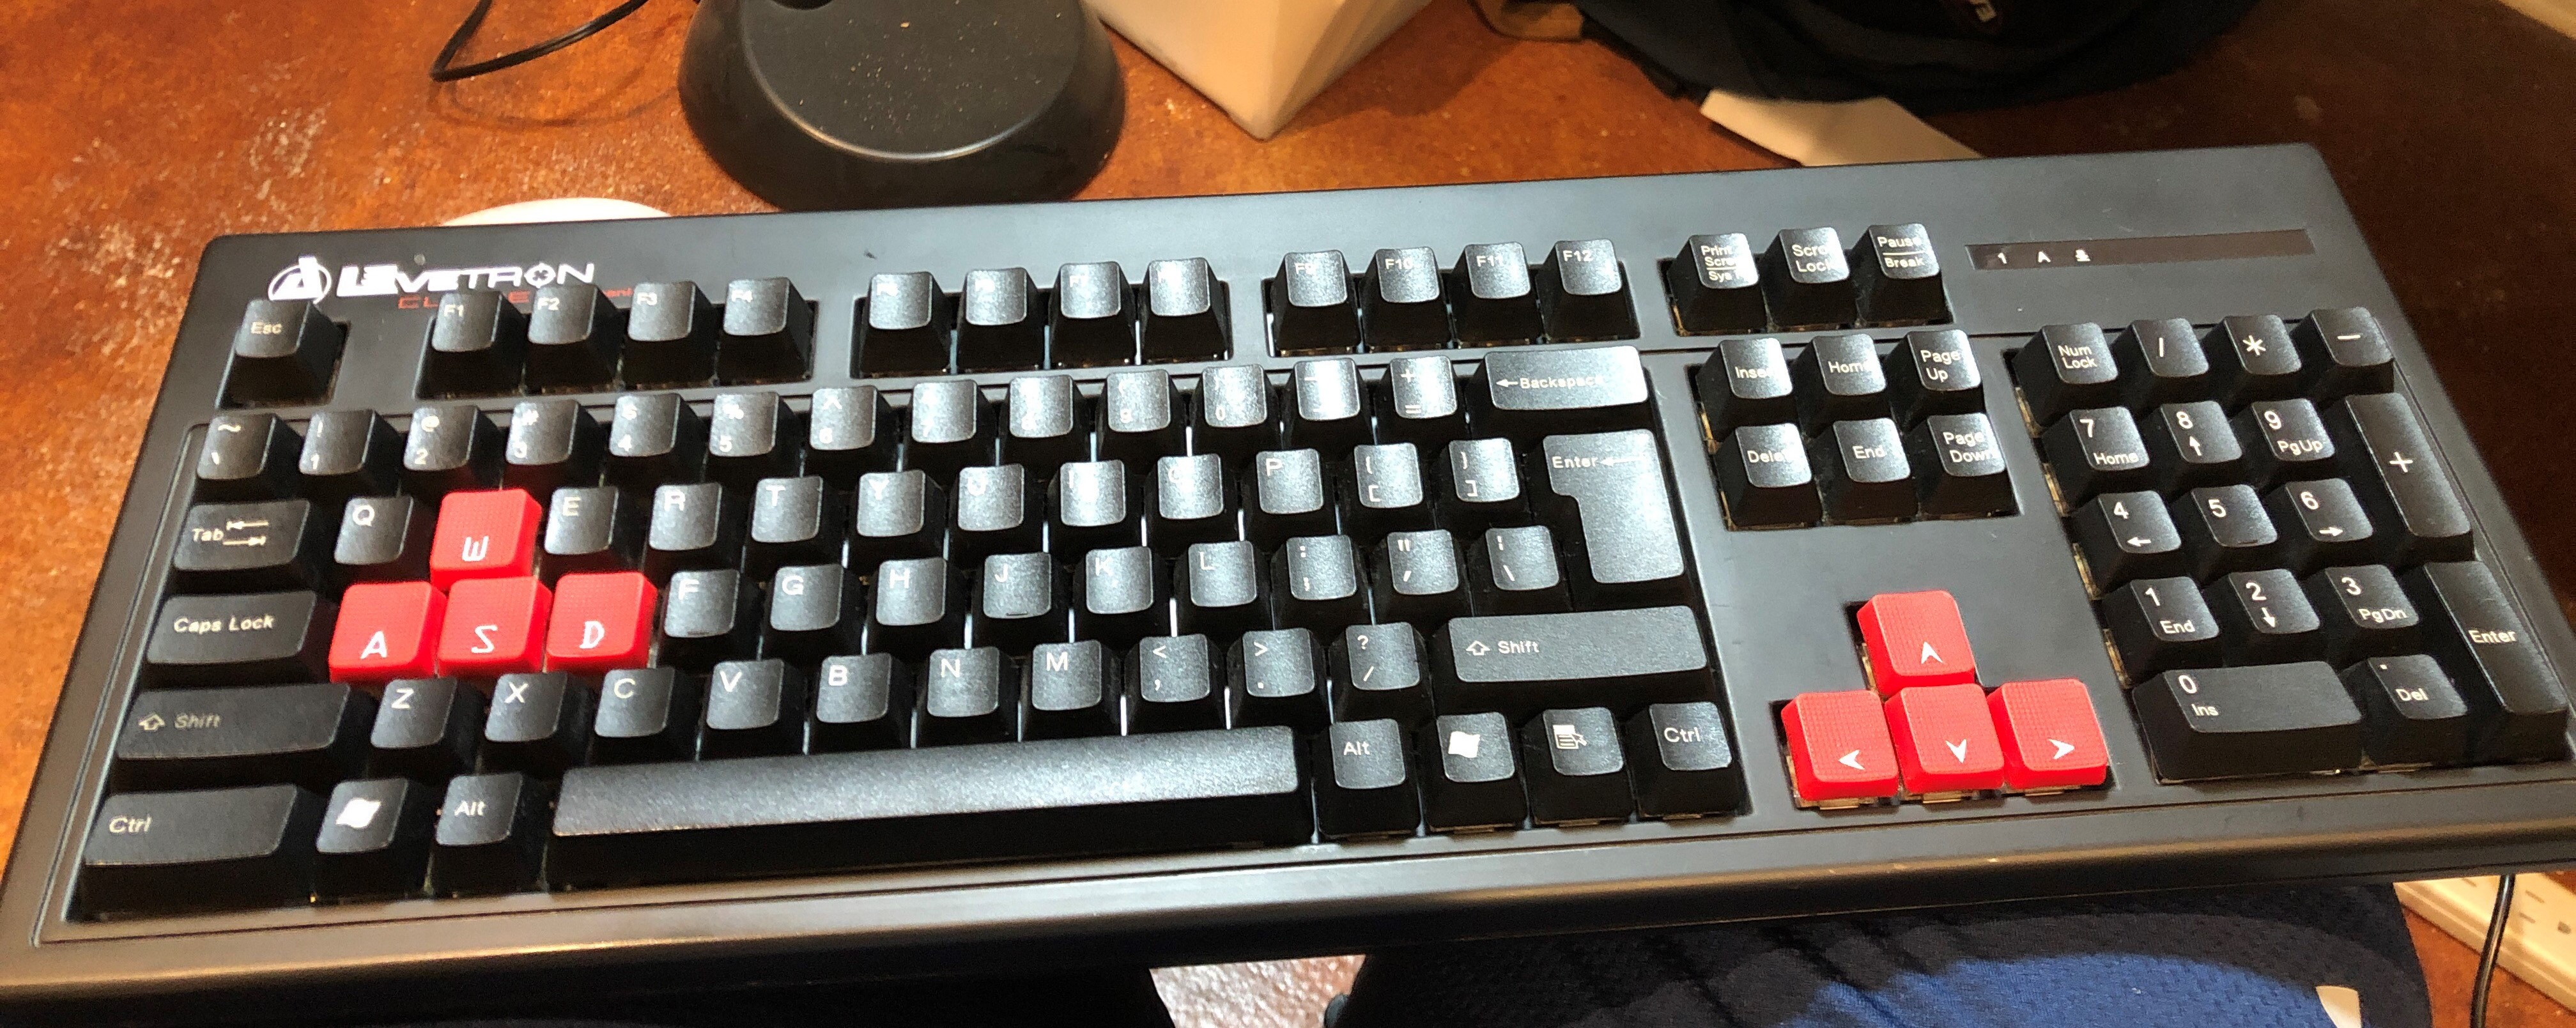 The fully reassembled keyboard